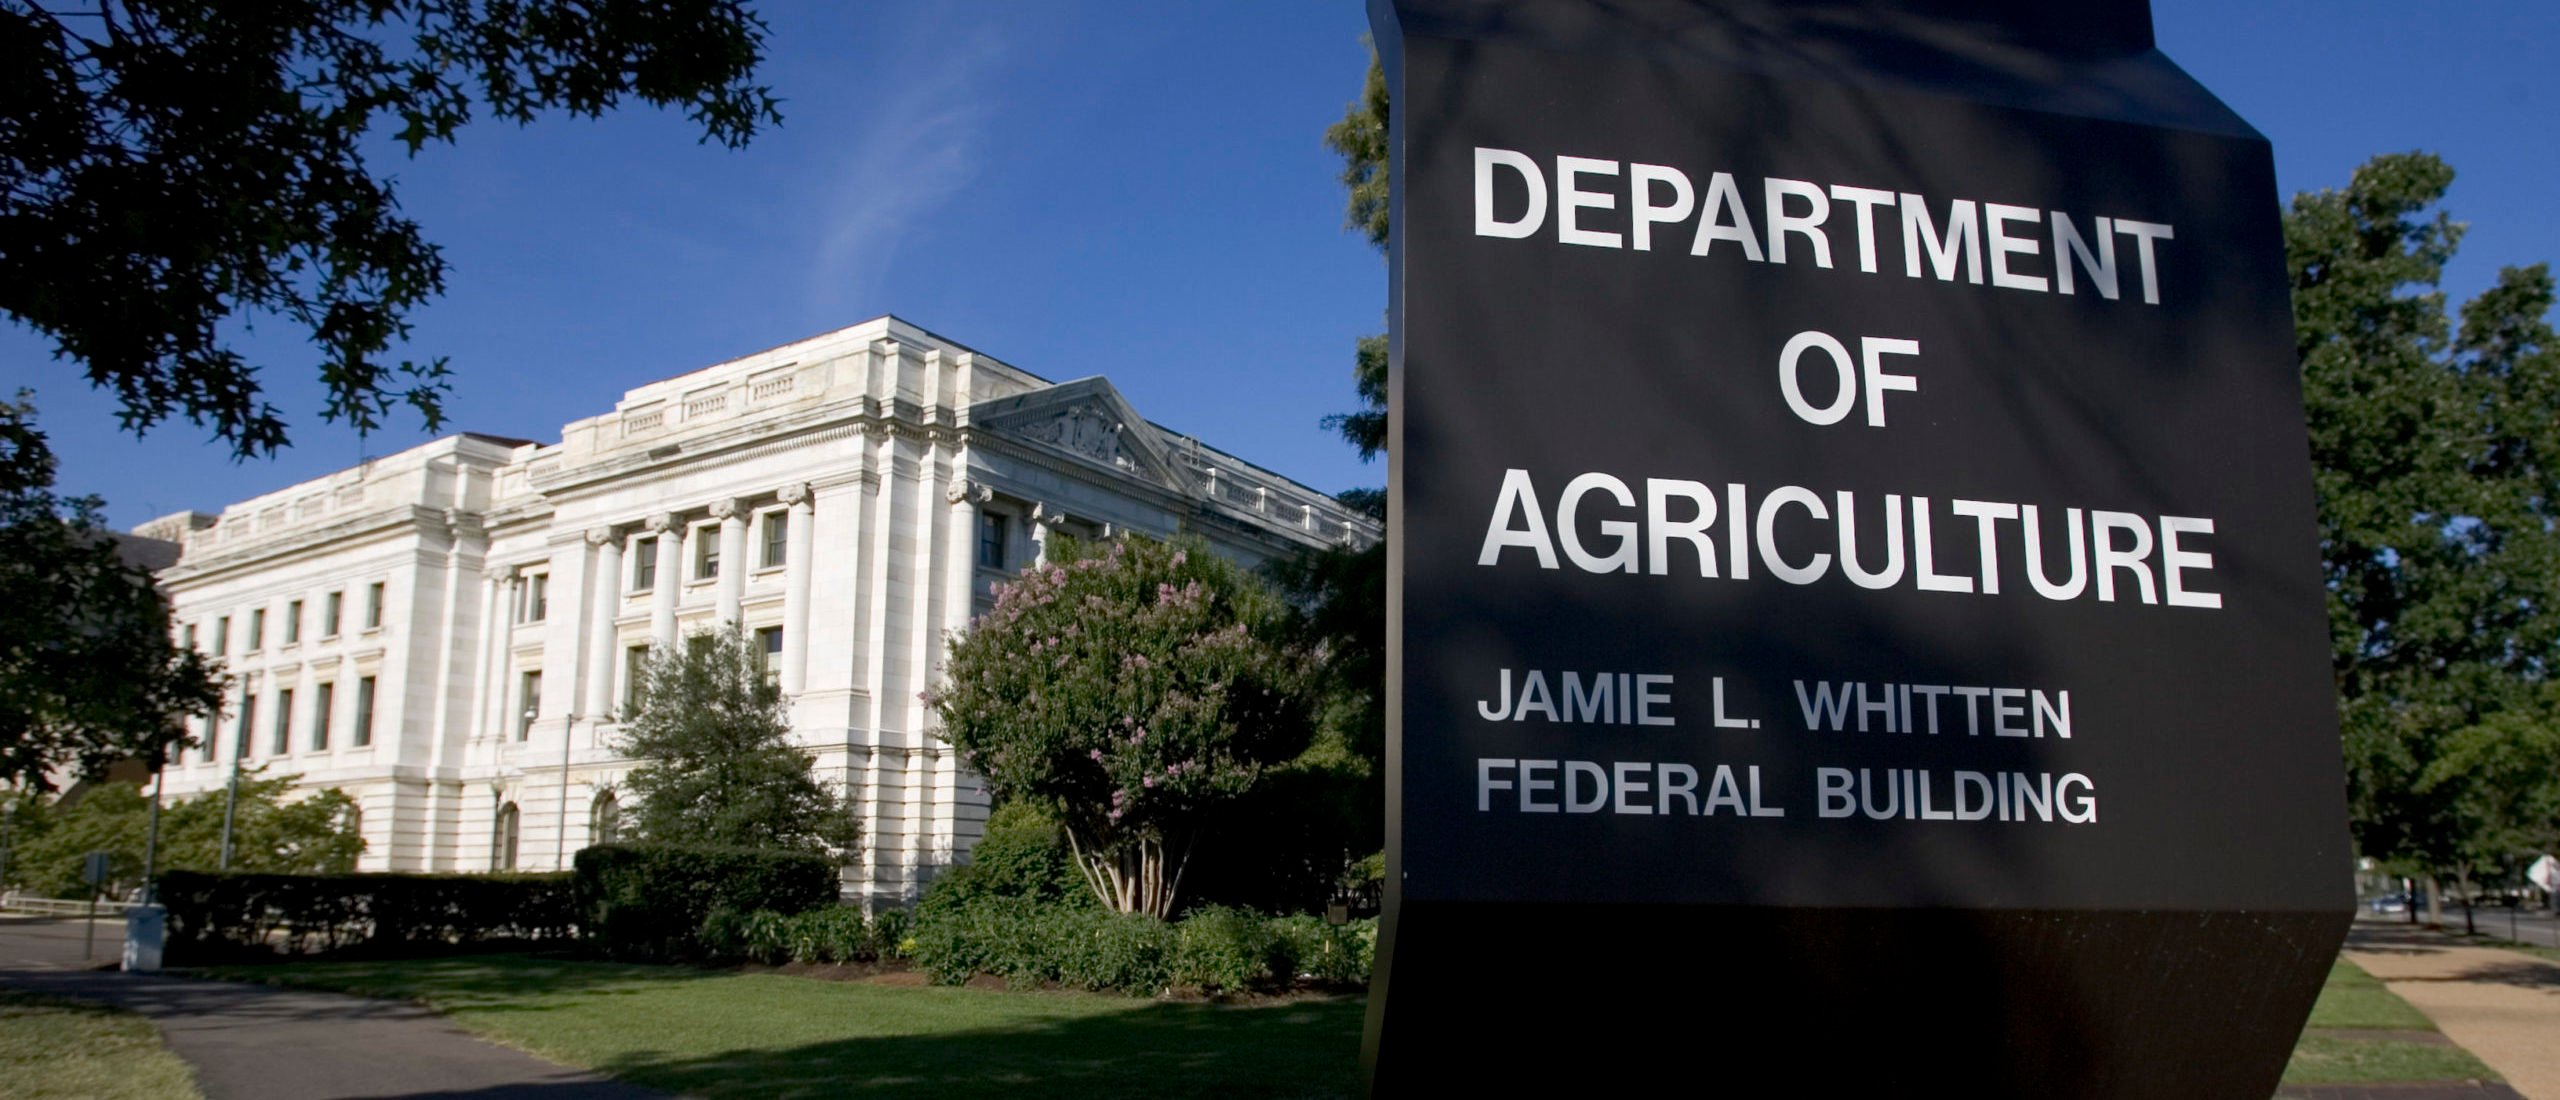 The US Department of Agriculture building is shown in Washington, DC, 21 July 2007. AFP PHOTO/SAUL LOEB (Photo by Saul LOEB / AFP) (Photo by SAUL LOEB/AFP via Getty Images)